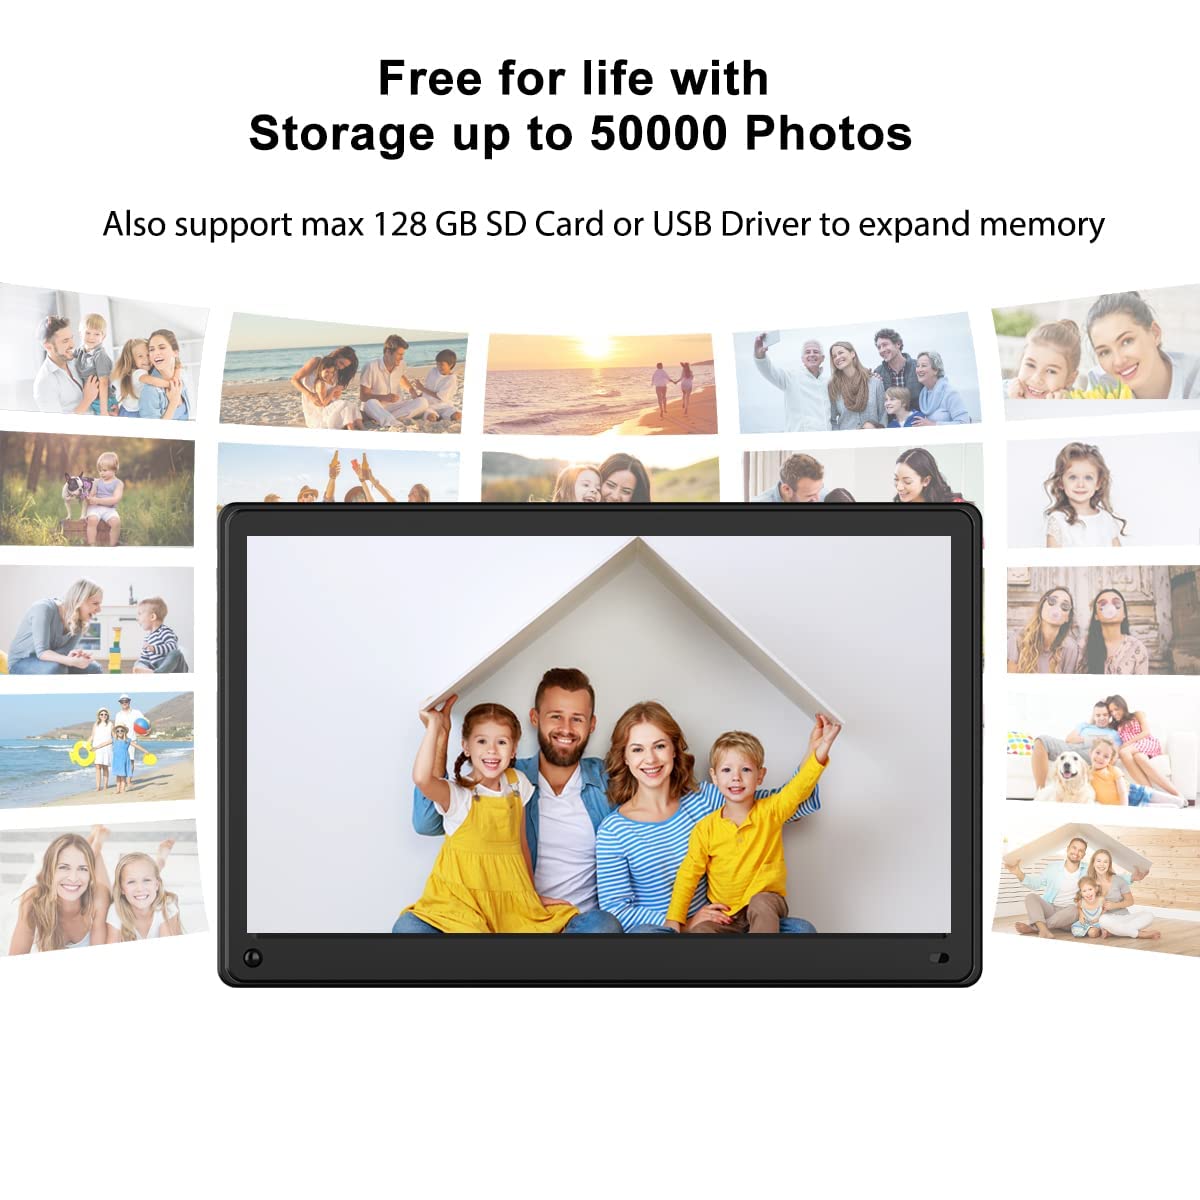 Digital Picture Frame 15.6 inch WiFi Digital Photo Frame with 32GB Storage, Auto-Rotate, IPS Touch Screen, APP Bidirectional Control, Free Unlimited Data, Share Moments Instantly via Free APP Email